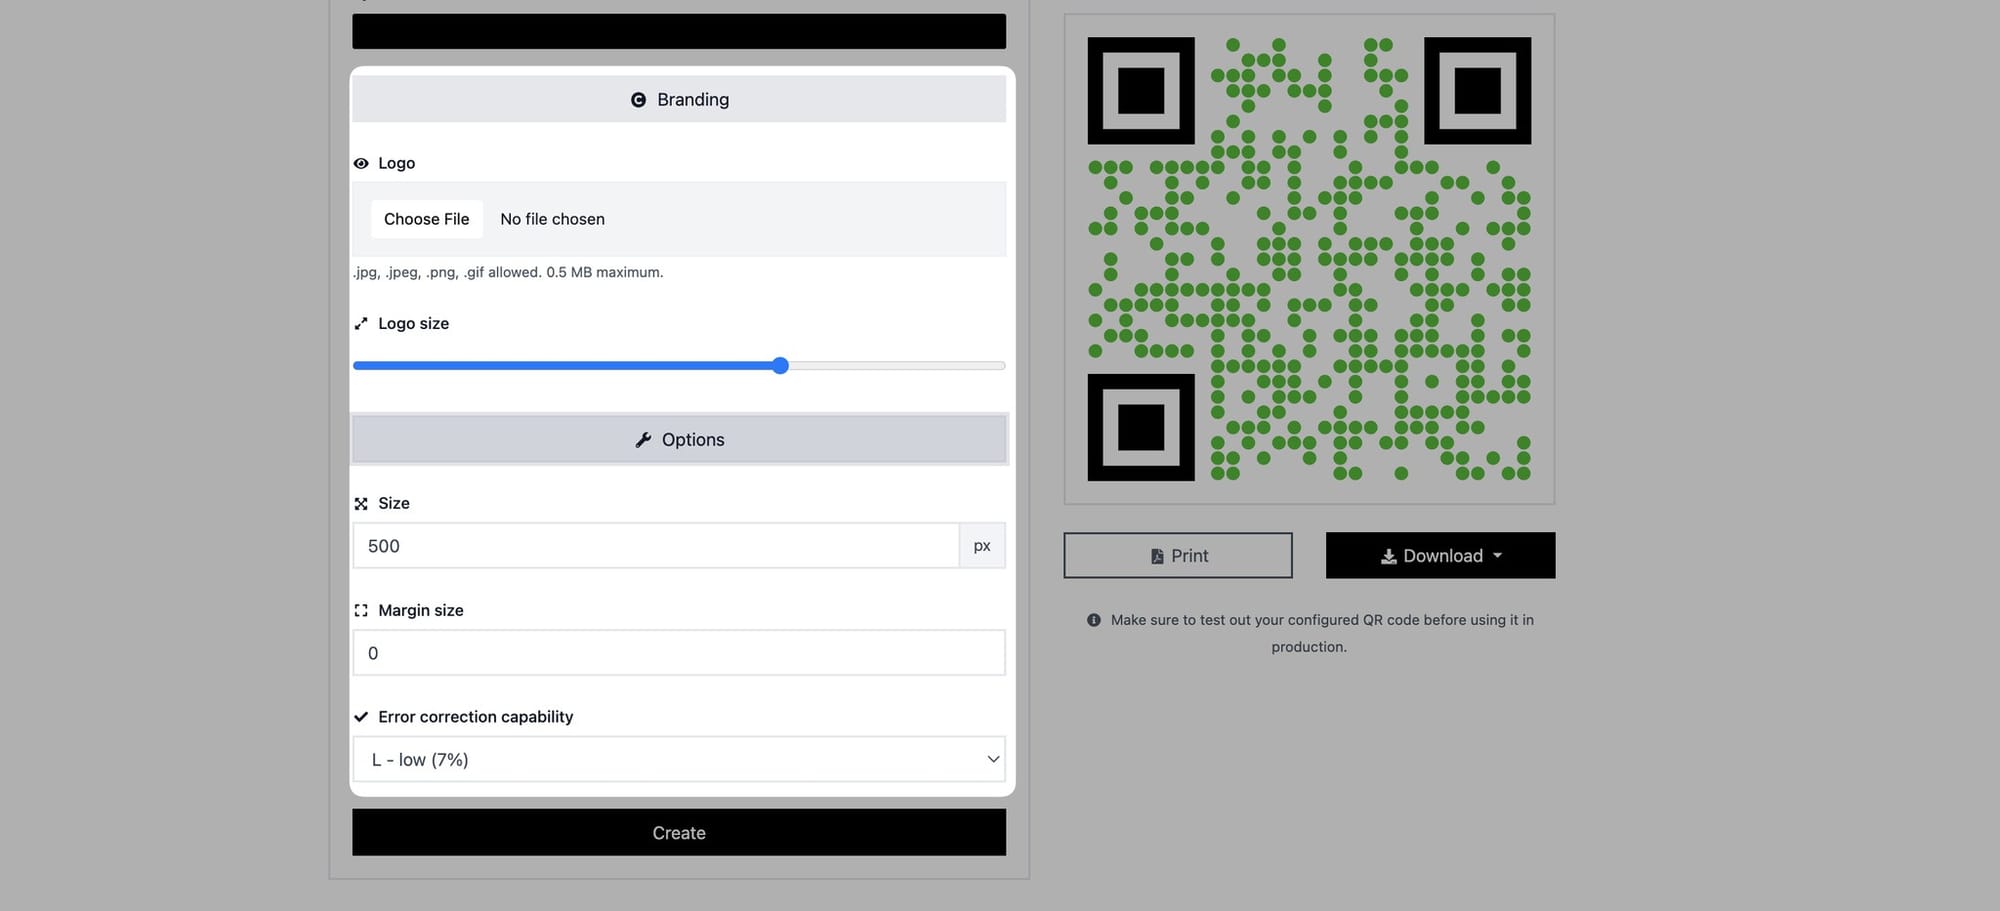 adding logo and customizing options part of a qr code